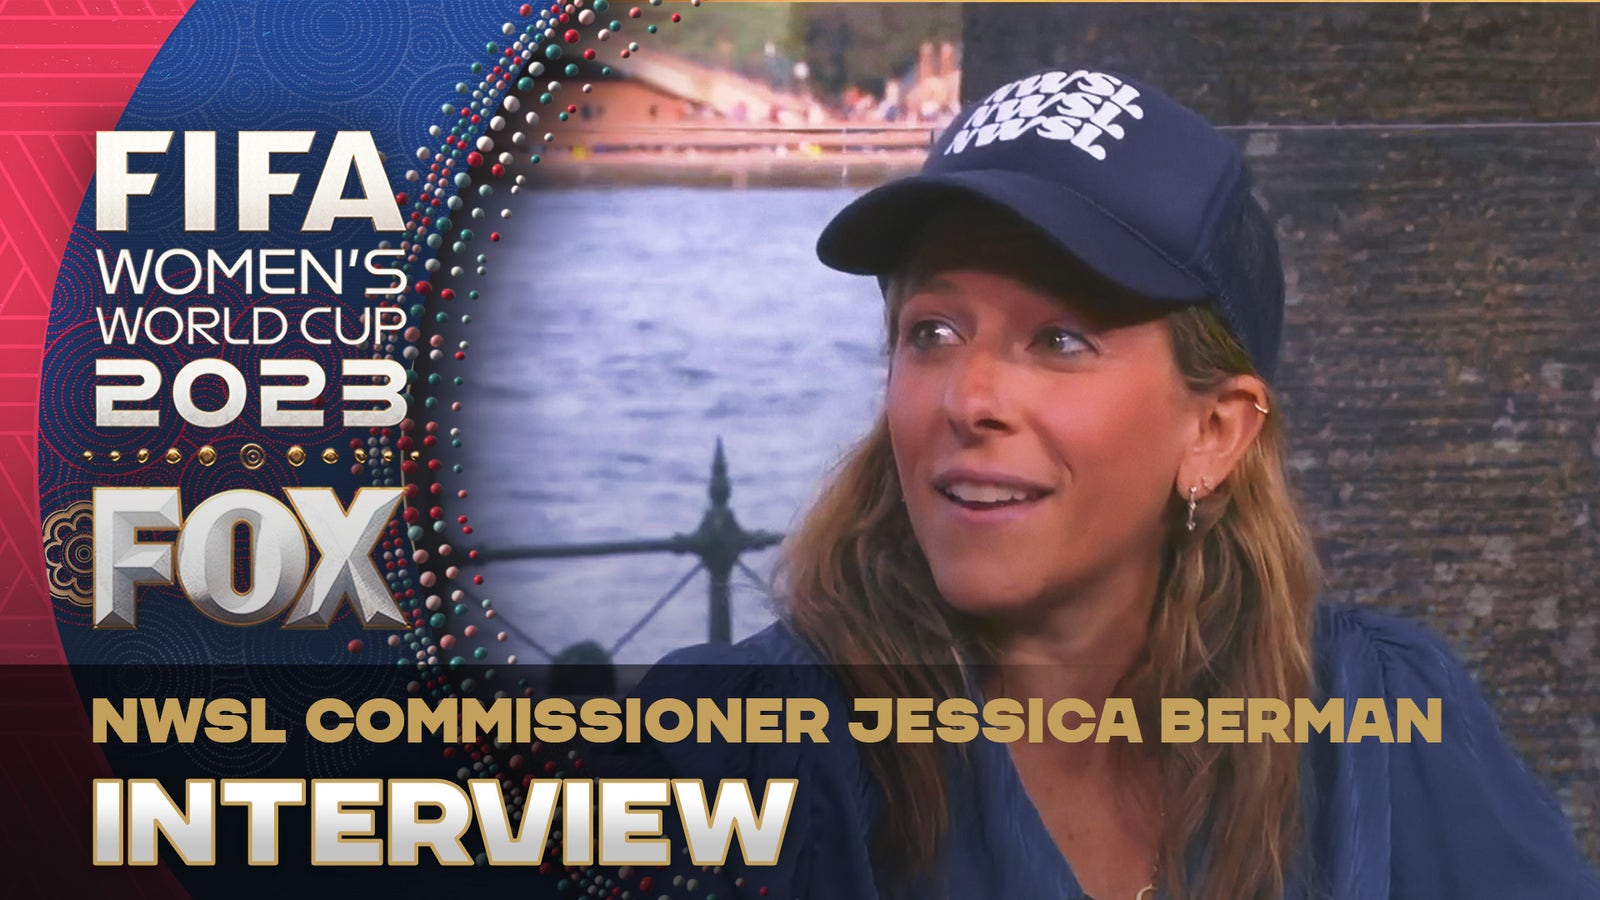 NWSL Commissioner Jessica Berman on the future of women's soccer 